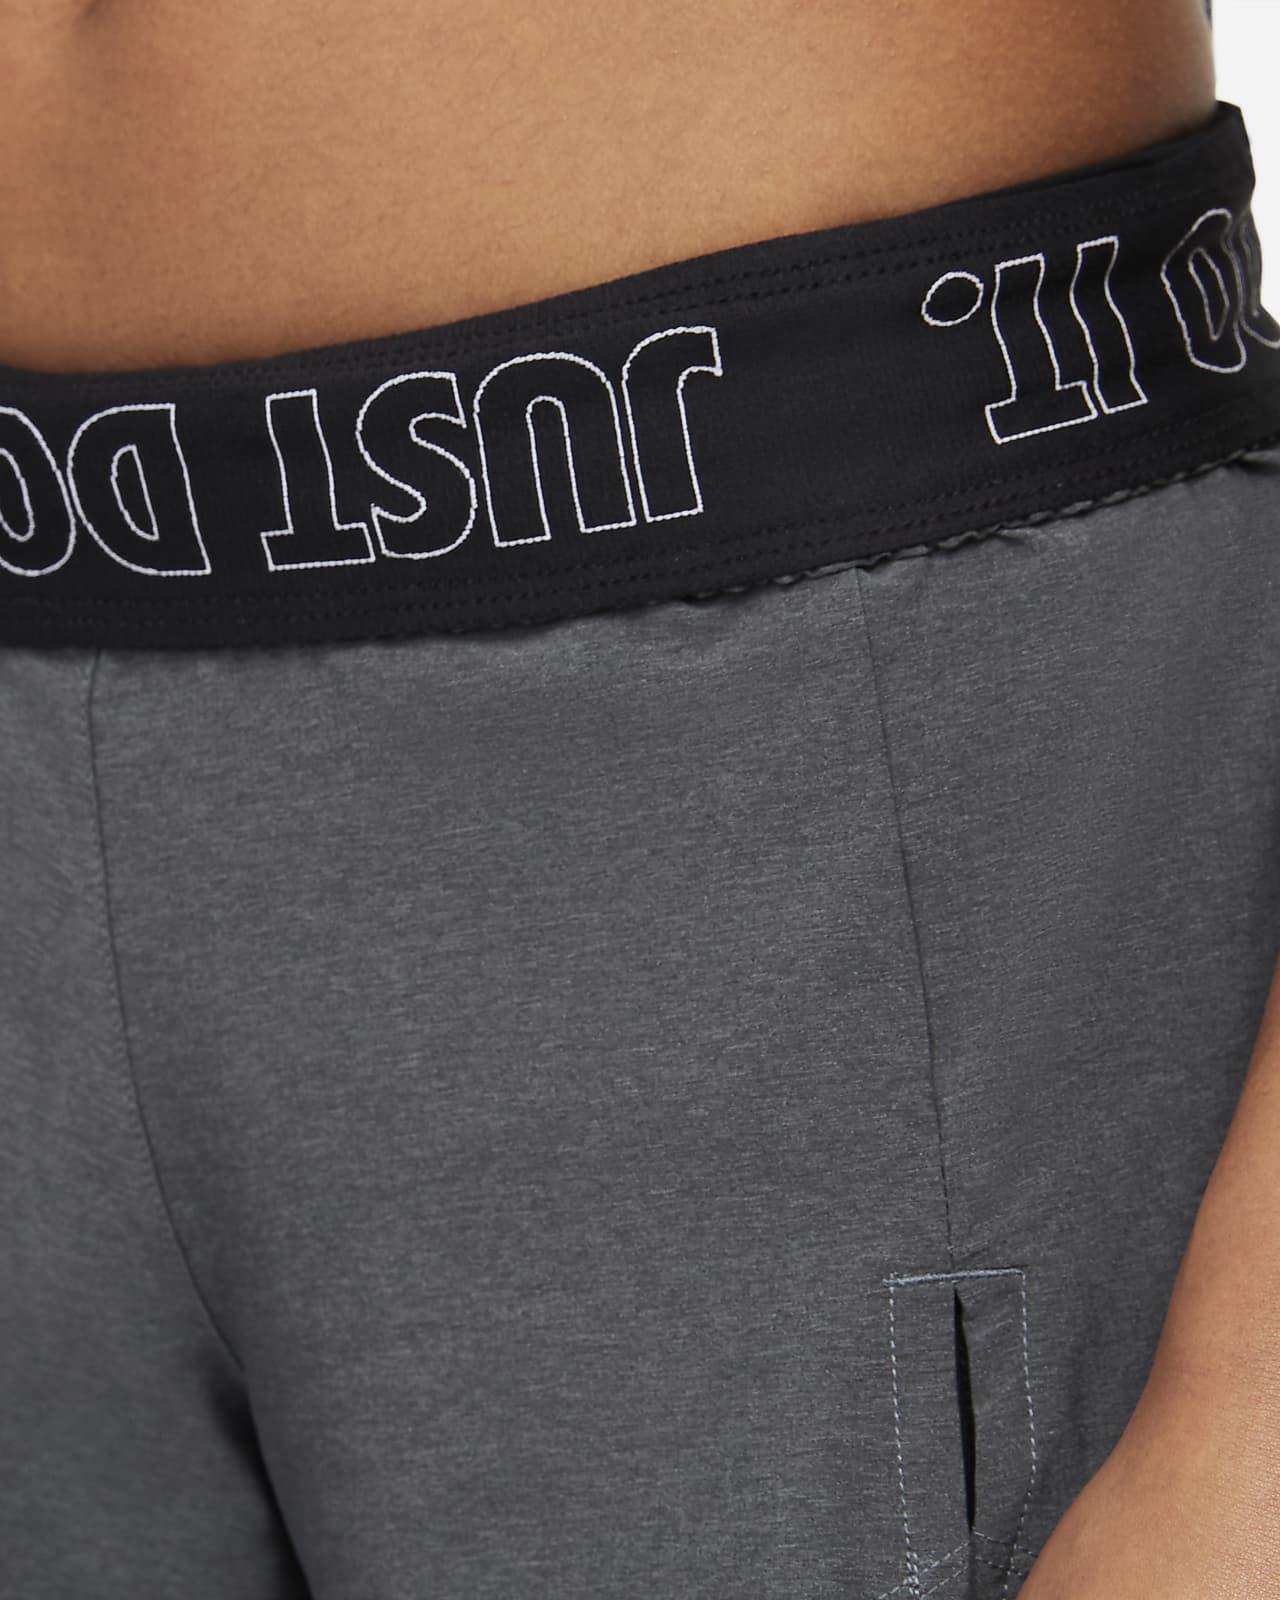 Buy Slate Grey 2-In-1 Training Shorts from Next Luxembourg